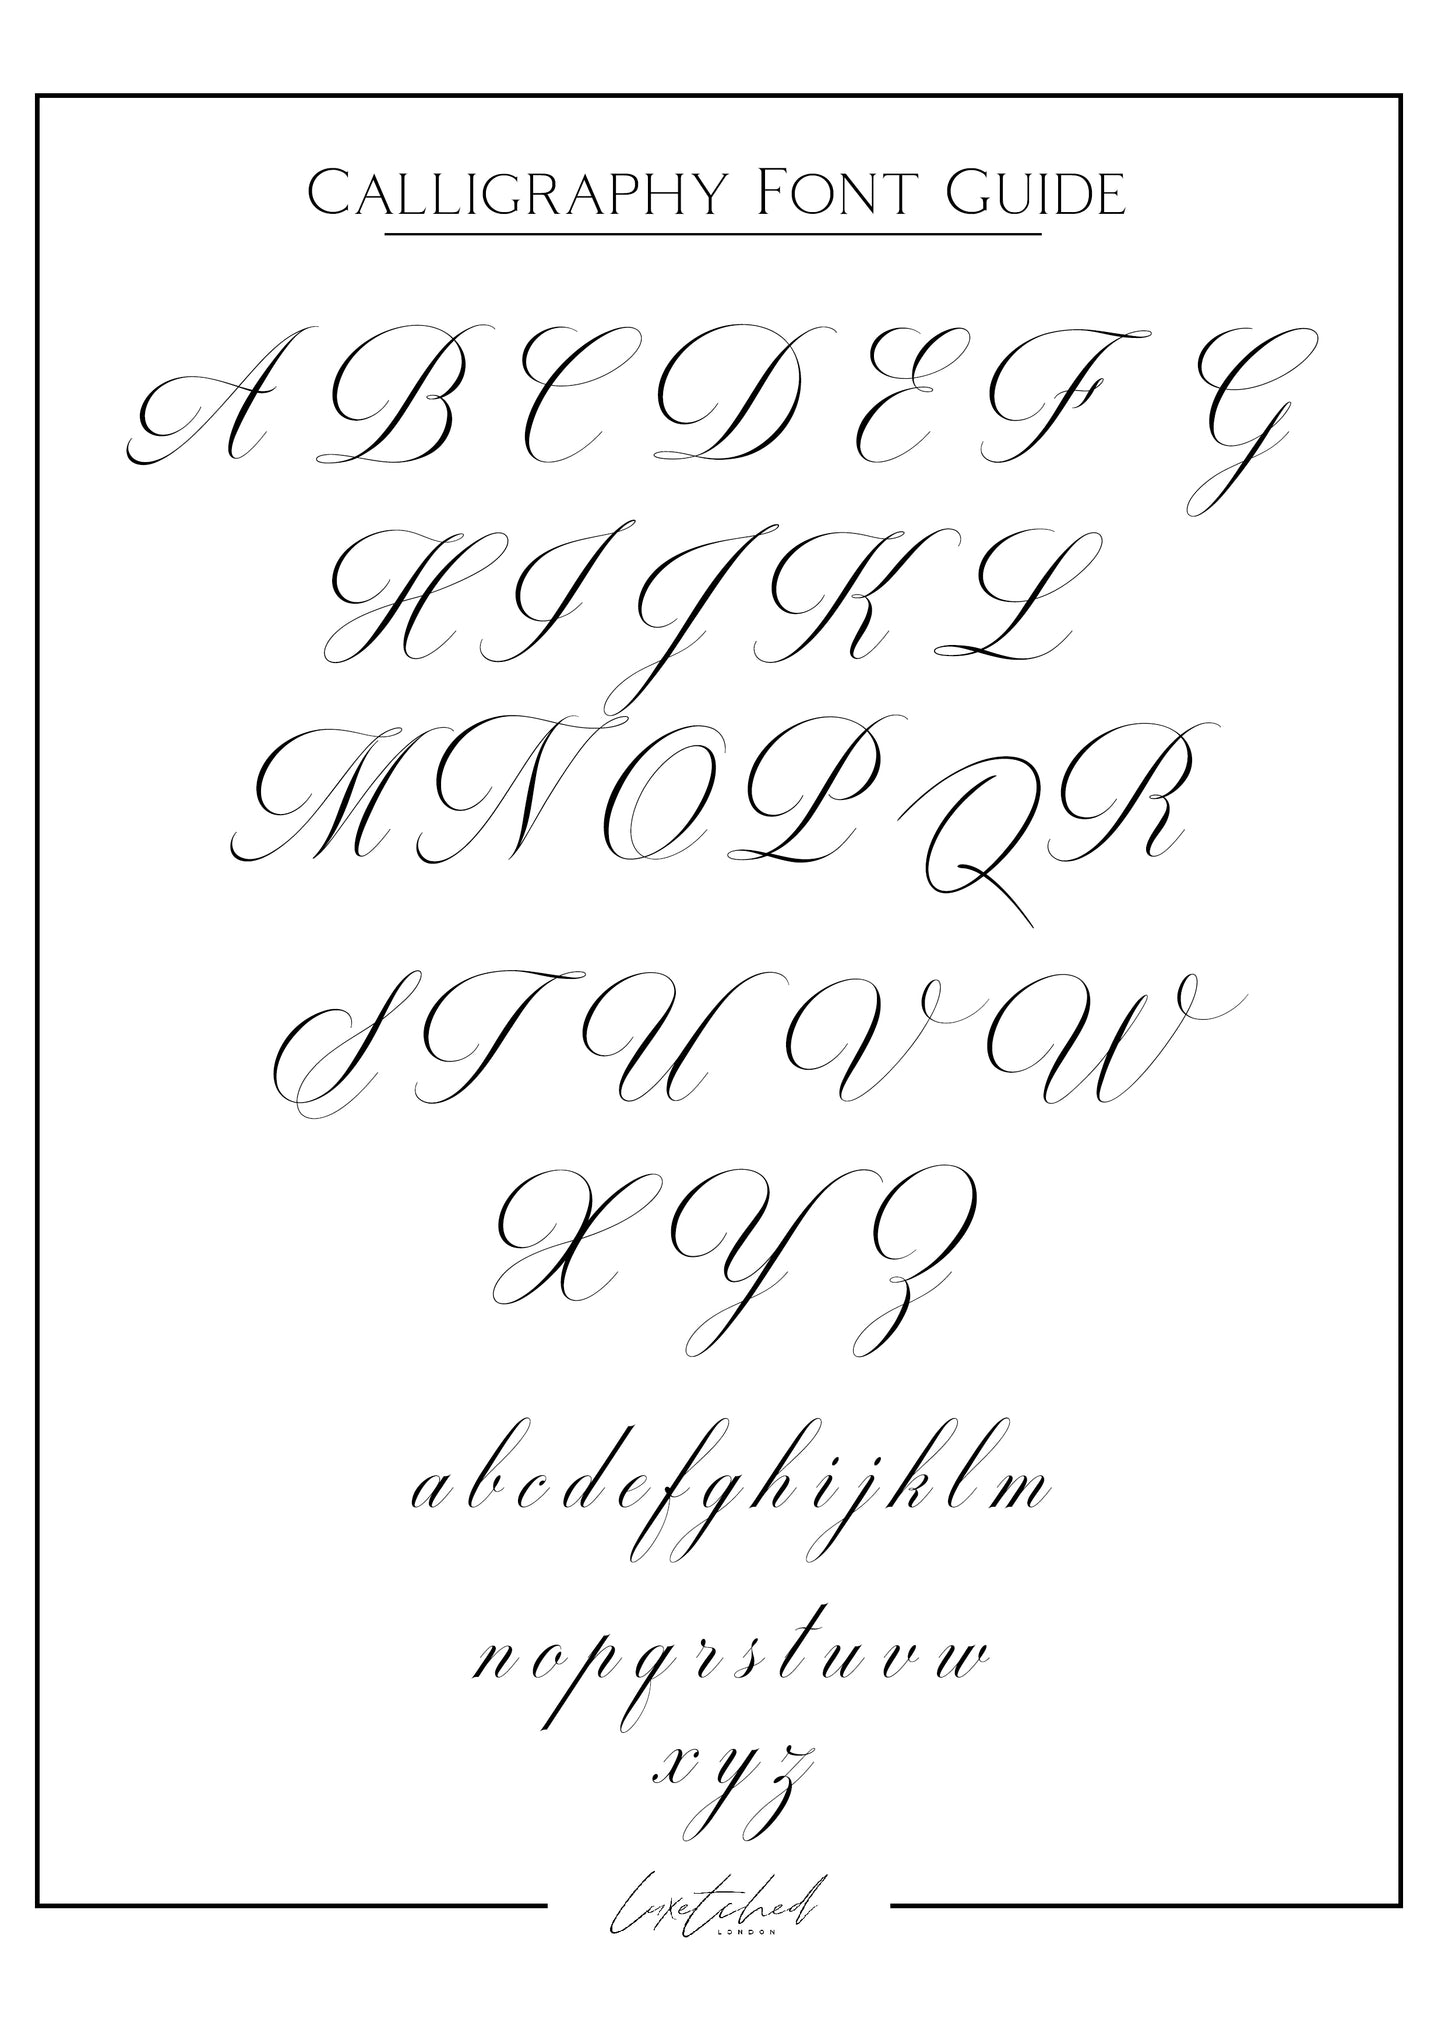 Calligraphy Font Guide.jpg